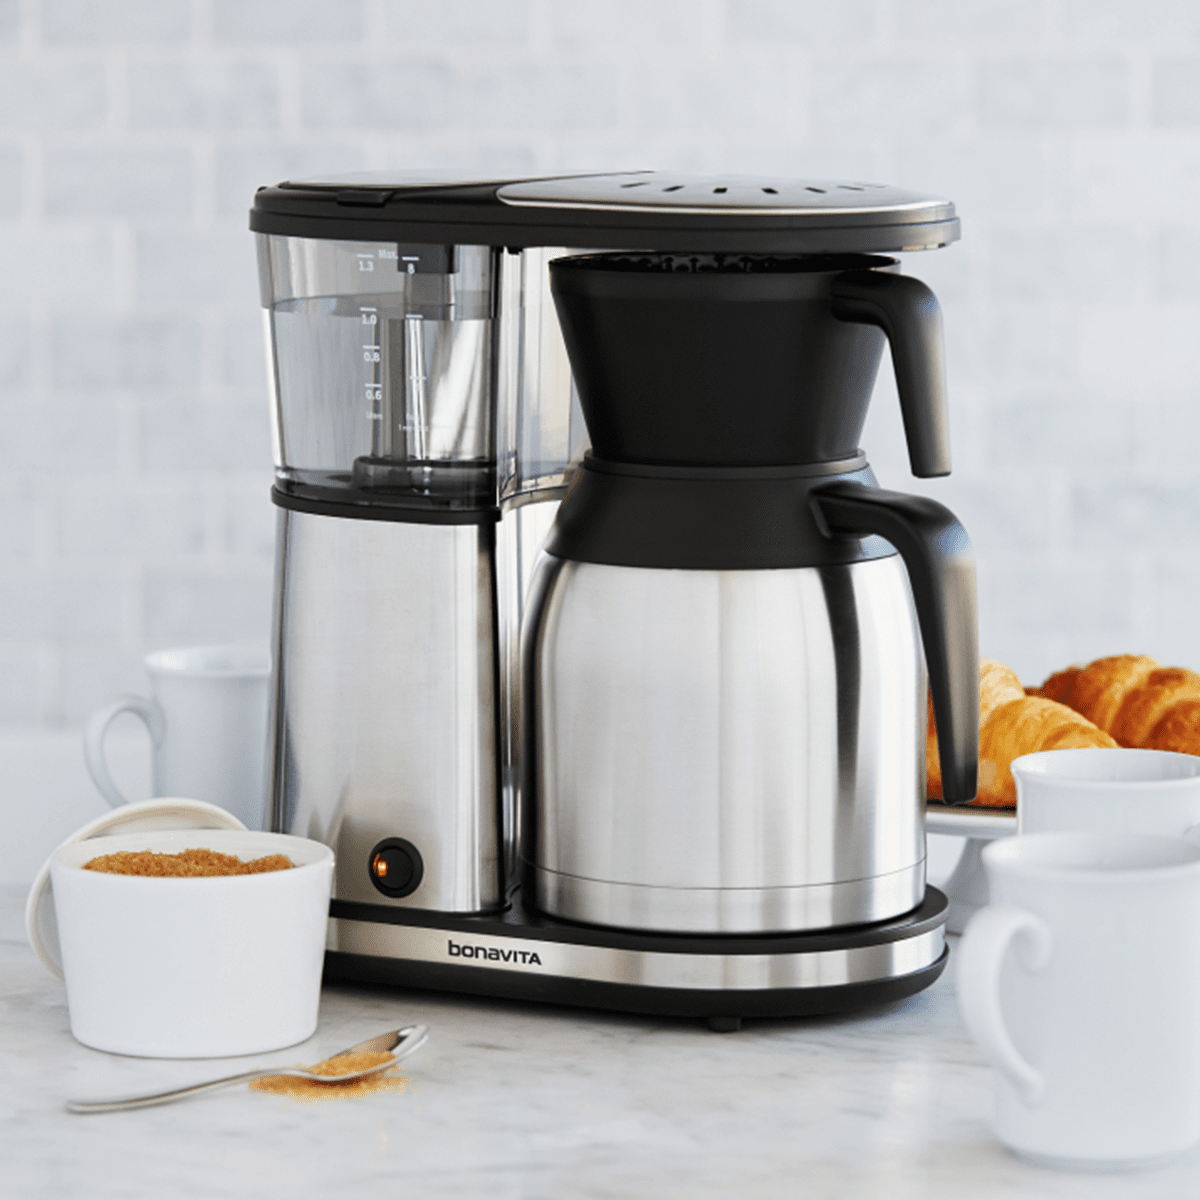 https://s3-assets.quenchessentials.com/media/images/products/bonavita-8-cup-ss-carafe-coffee-maker-lifestyle-3.png